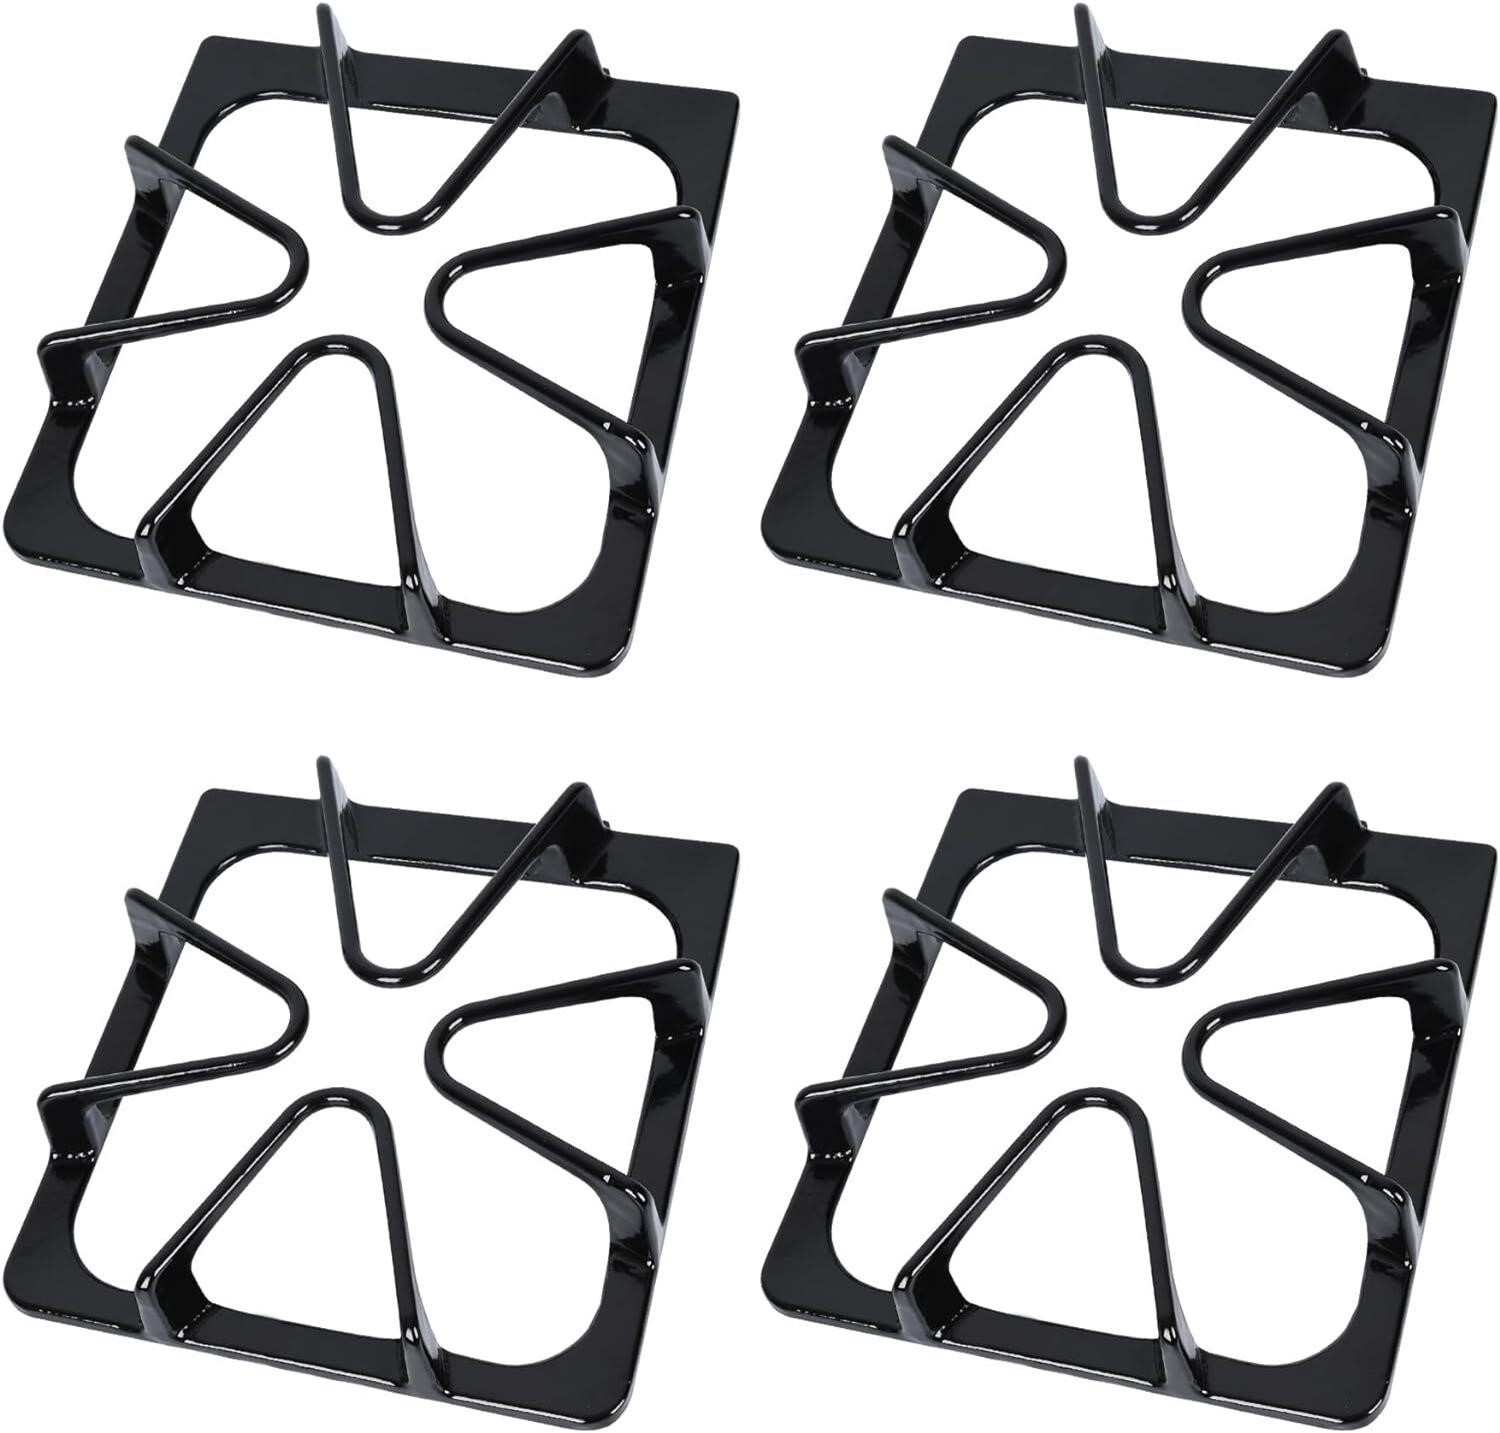 W10447925 Grate 8.3x8.8. For Whirlpool  4Pc